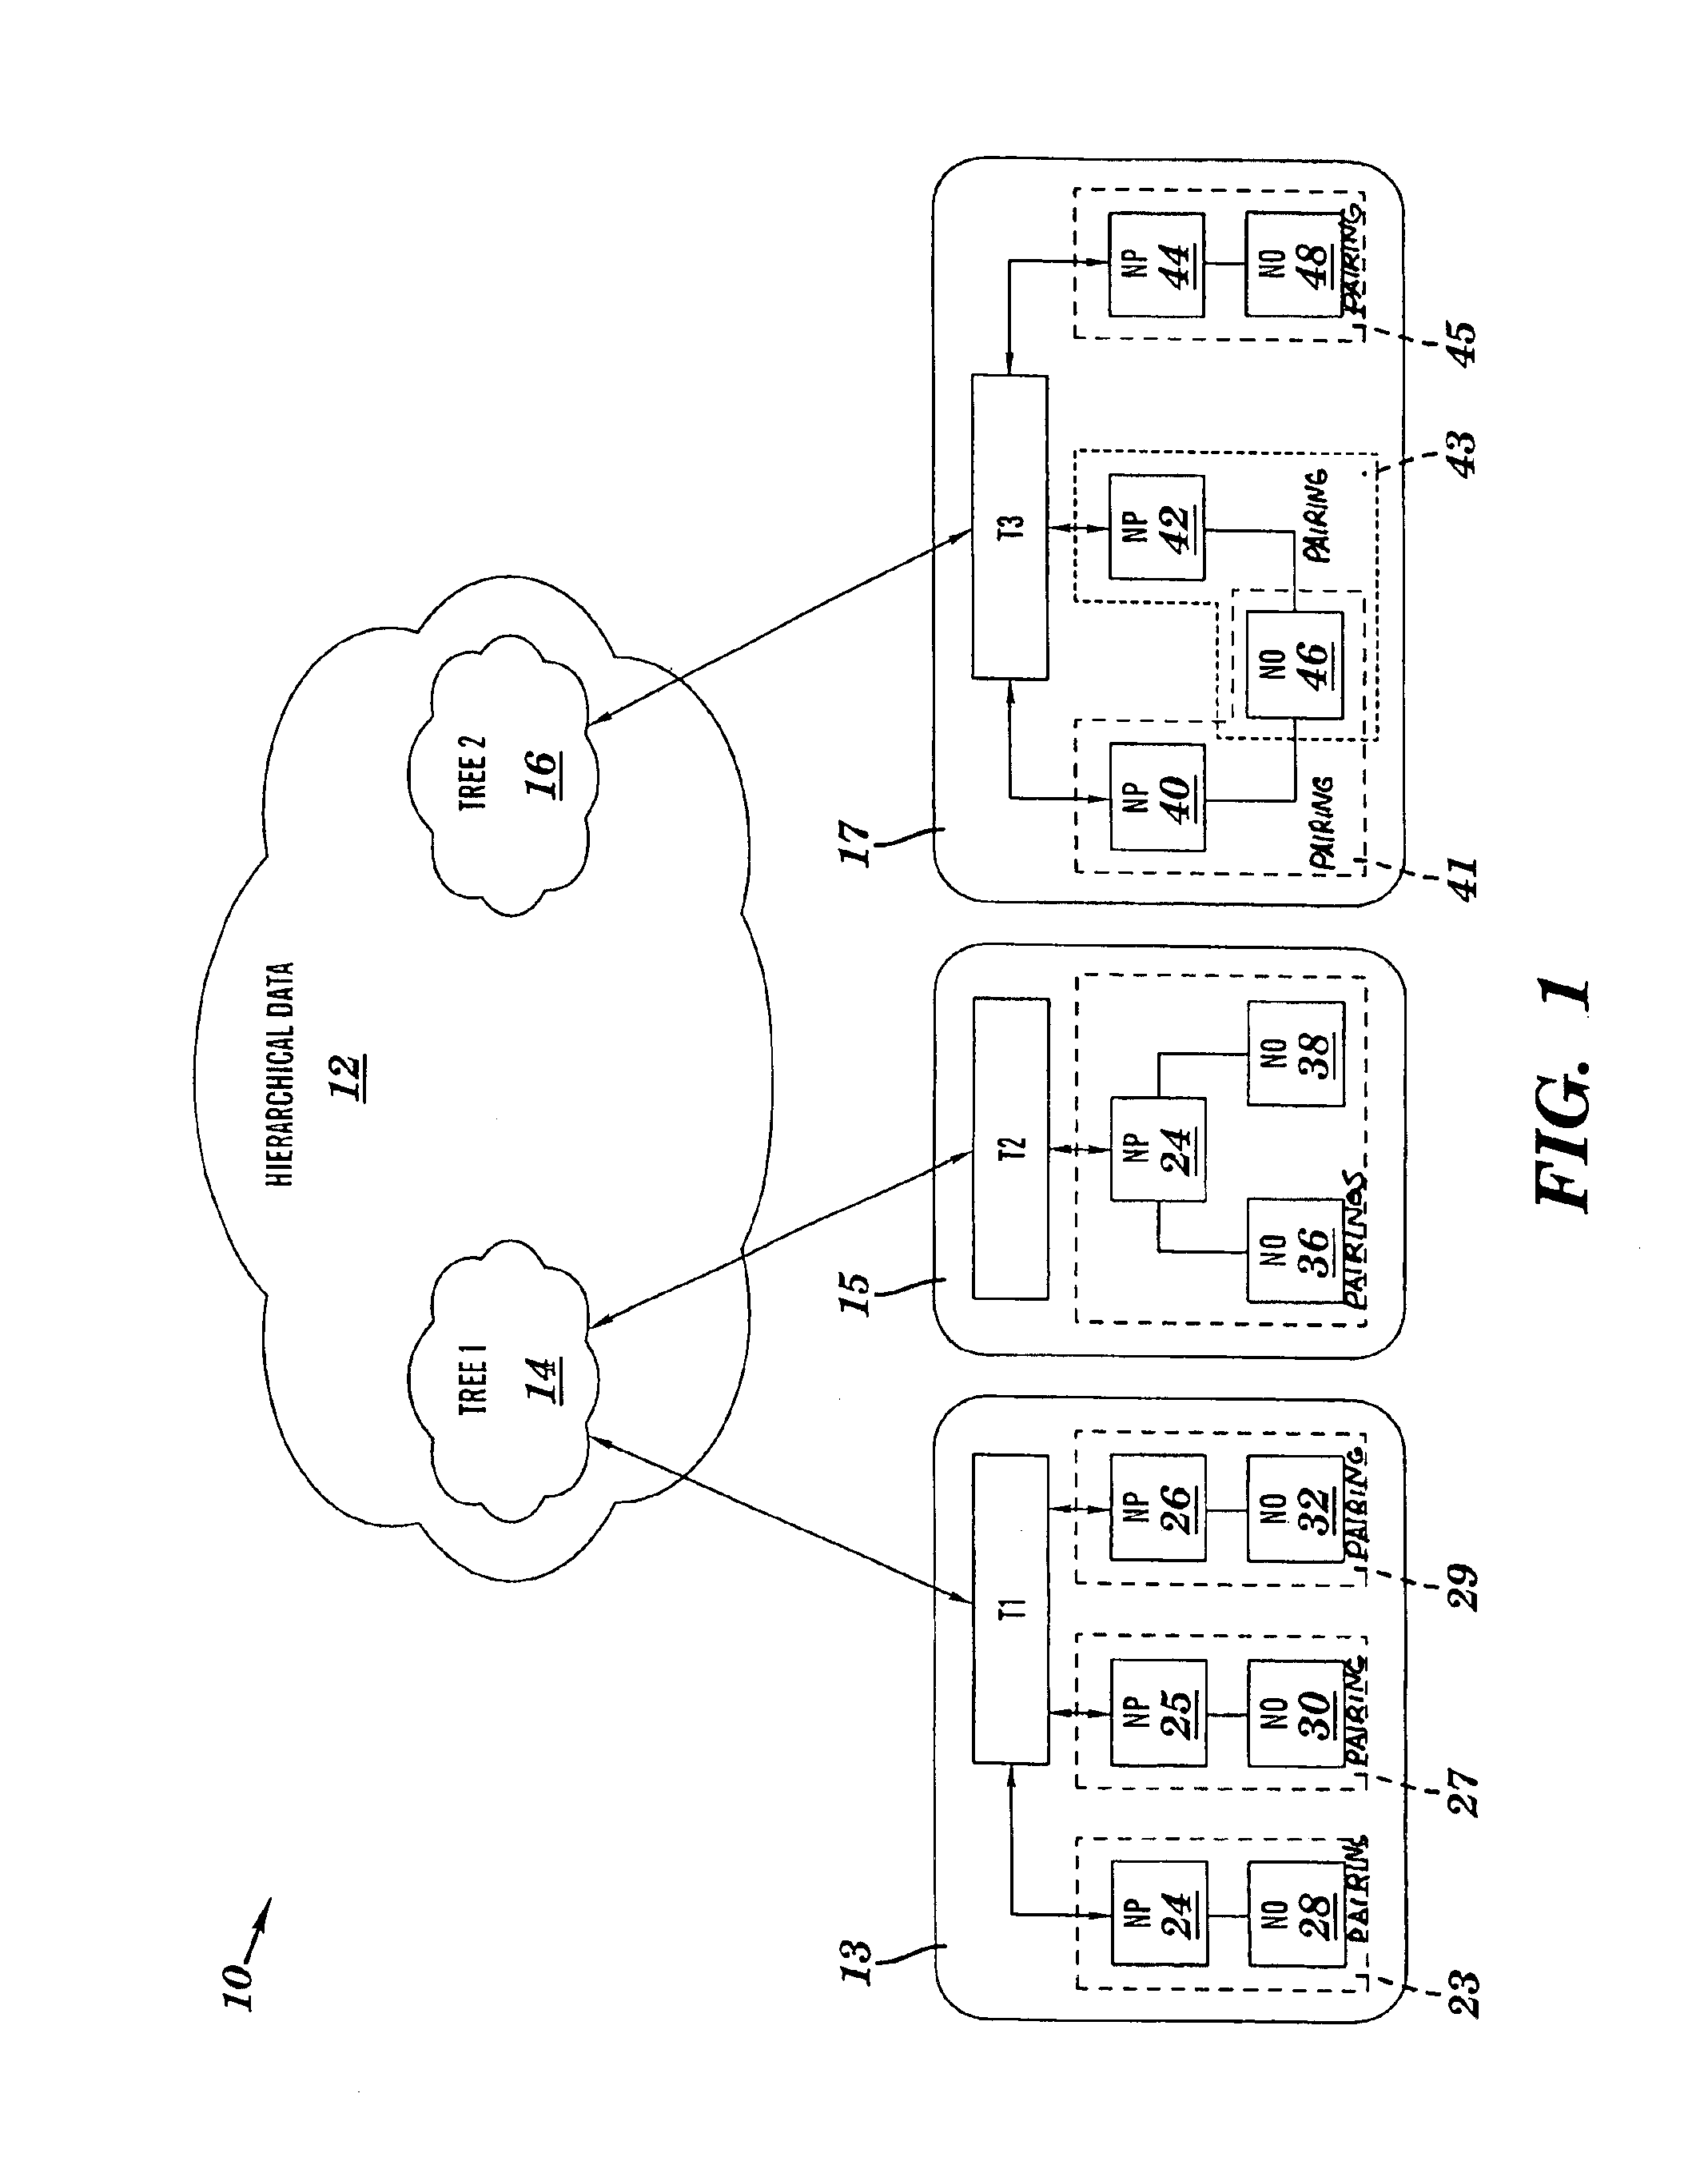 Directed non-cyclic graph walking system and method